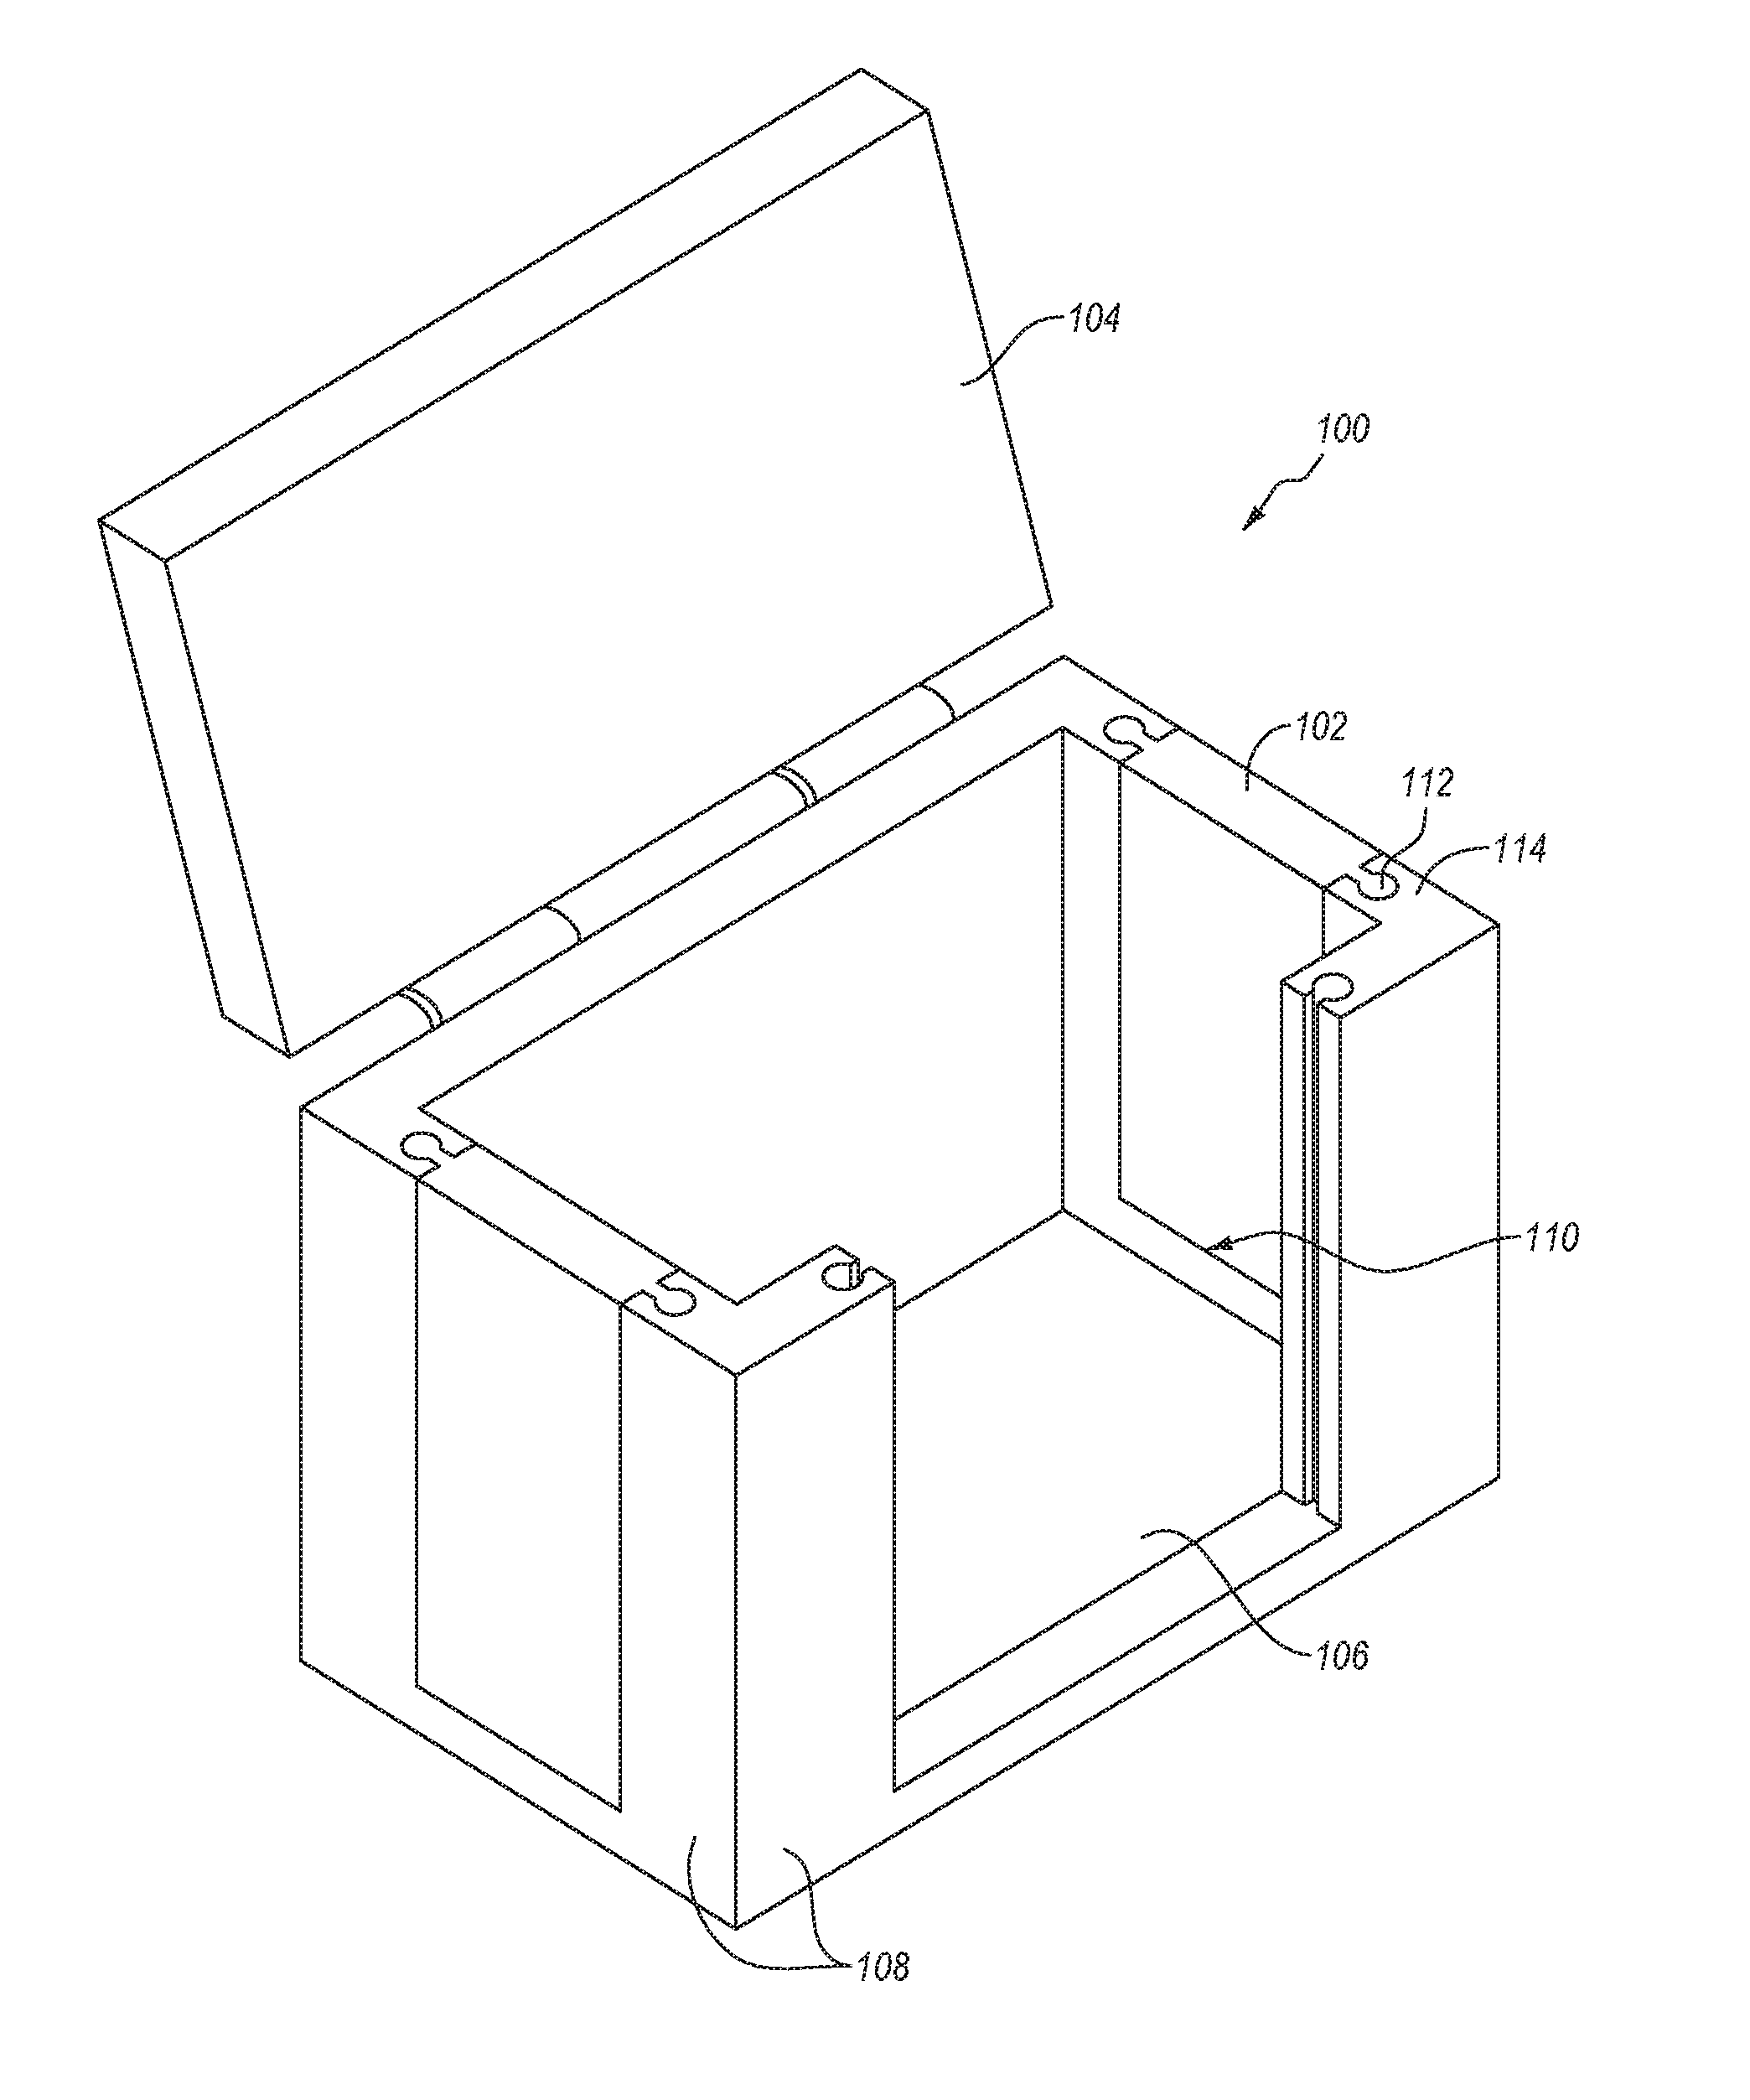 Integrated thermal elements in a thermally controlled container